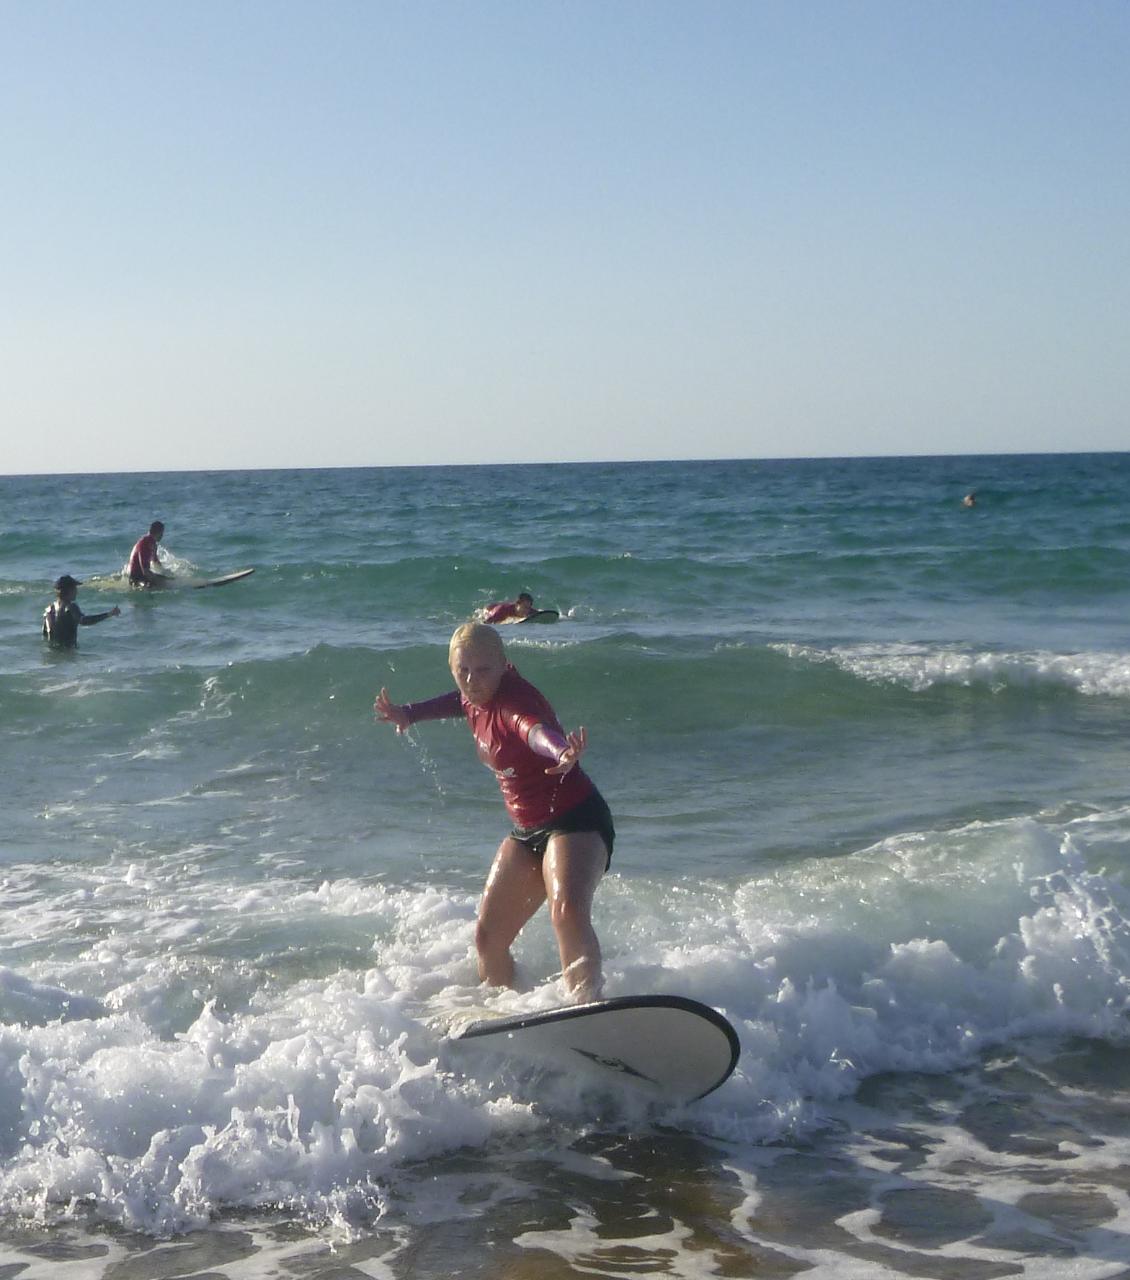 Surf 'n Salsa in the South West of France